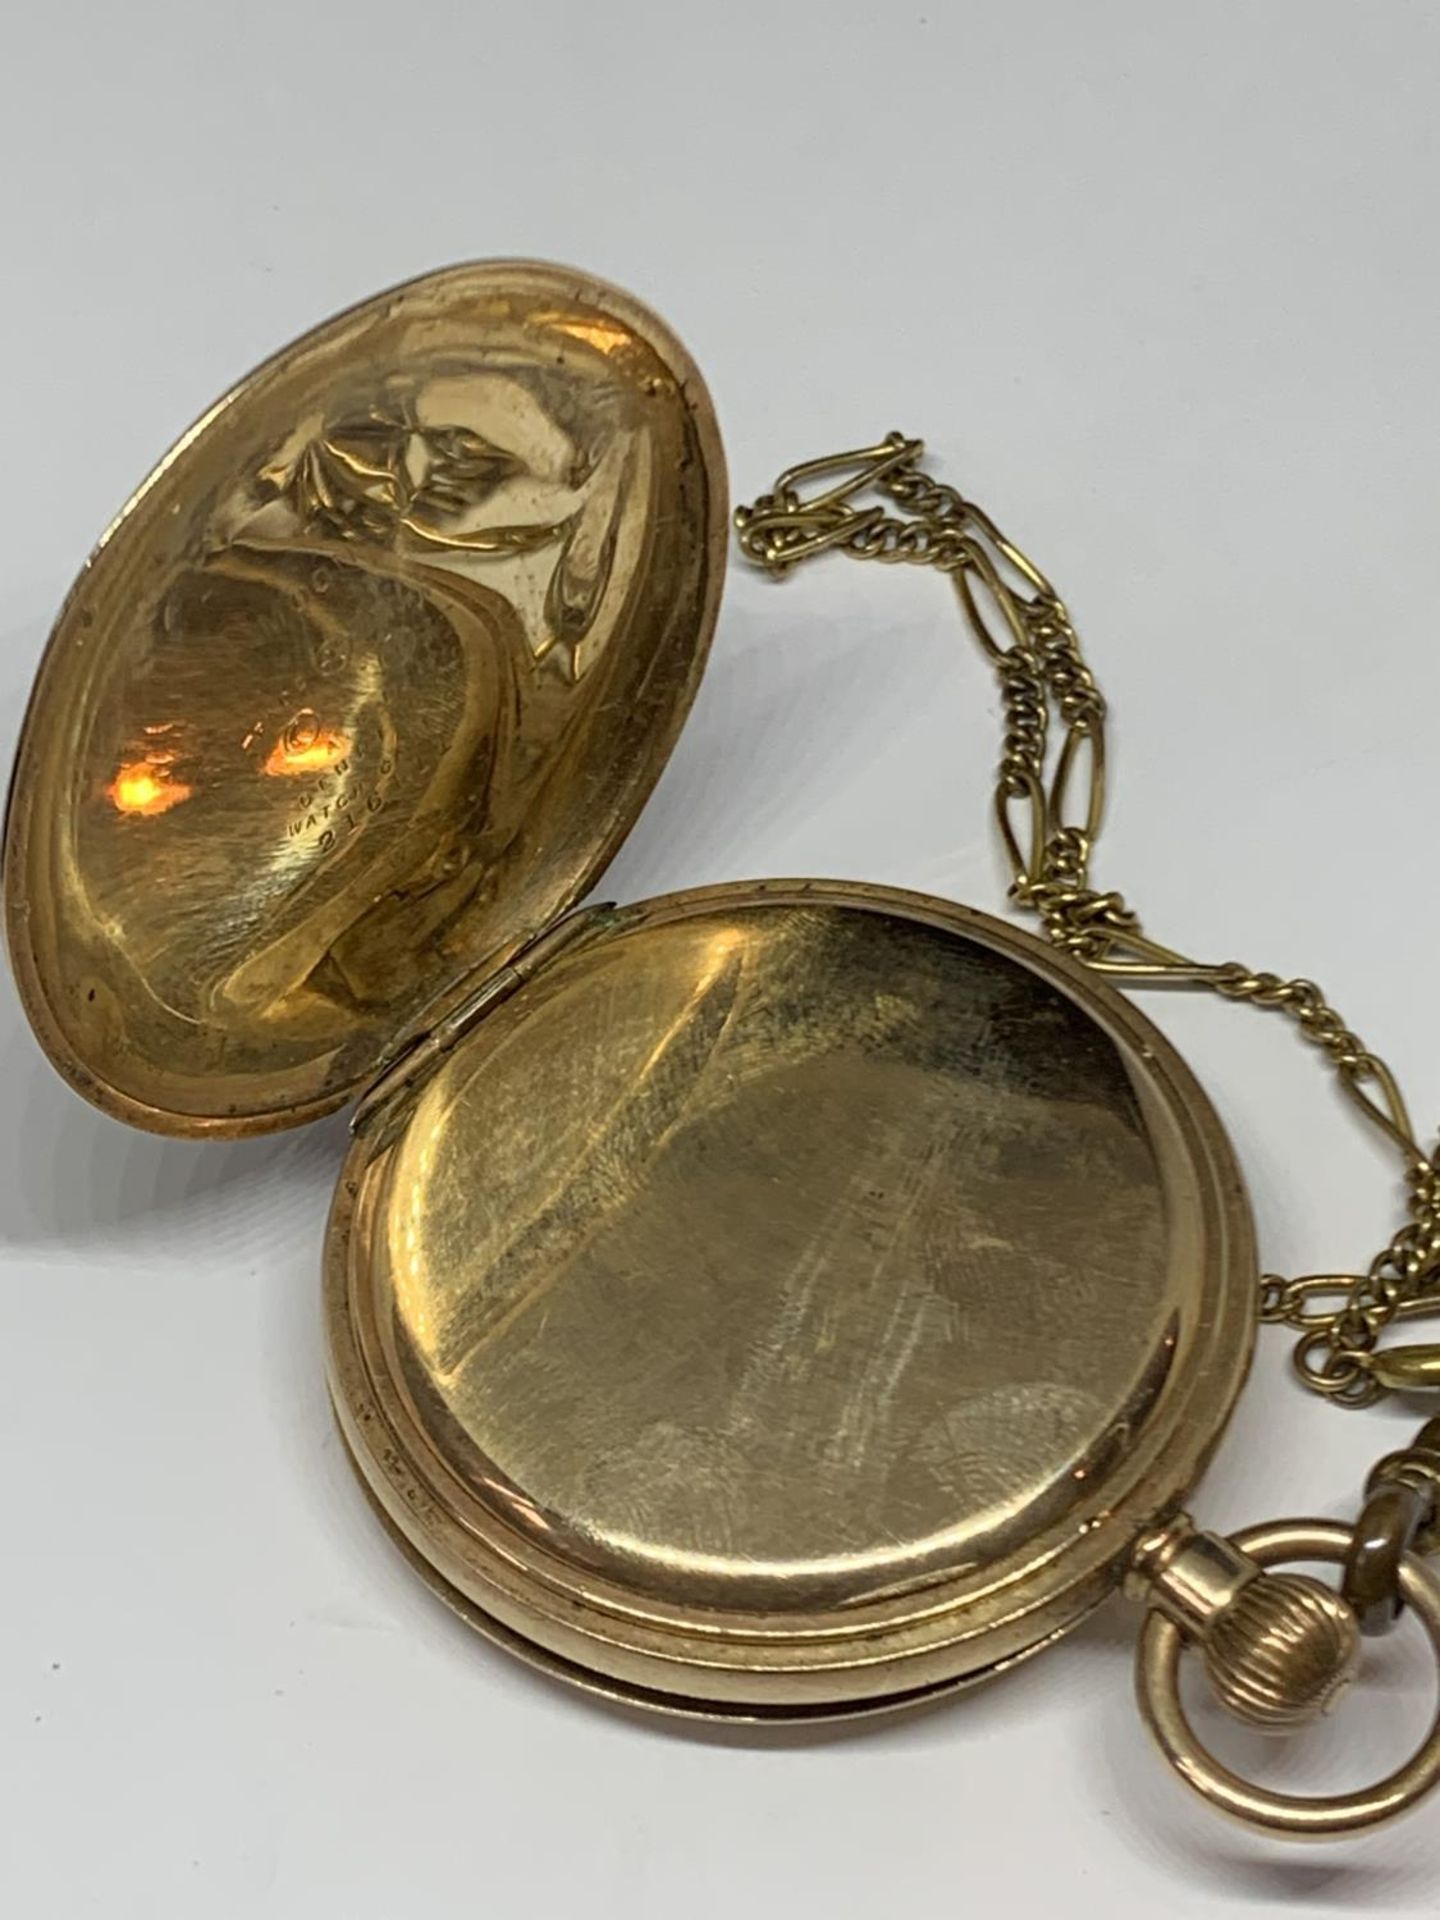 A WALTHAM GOLD PLATED FULL HUNTER POCKET WATCH WITH YELLOW METAL CHAIN - Image 3 of 3